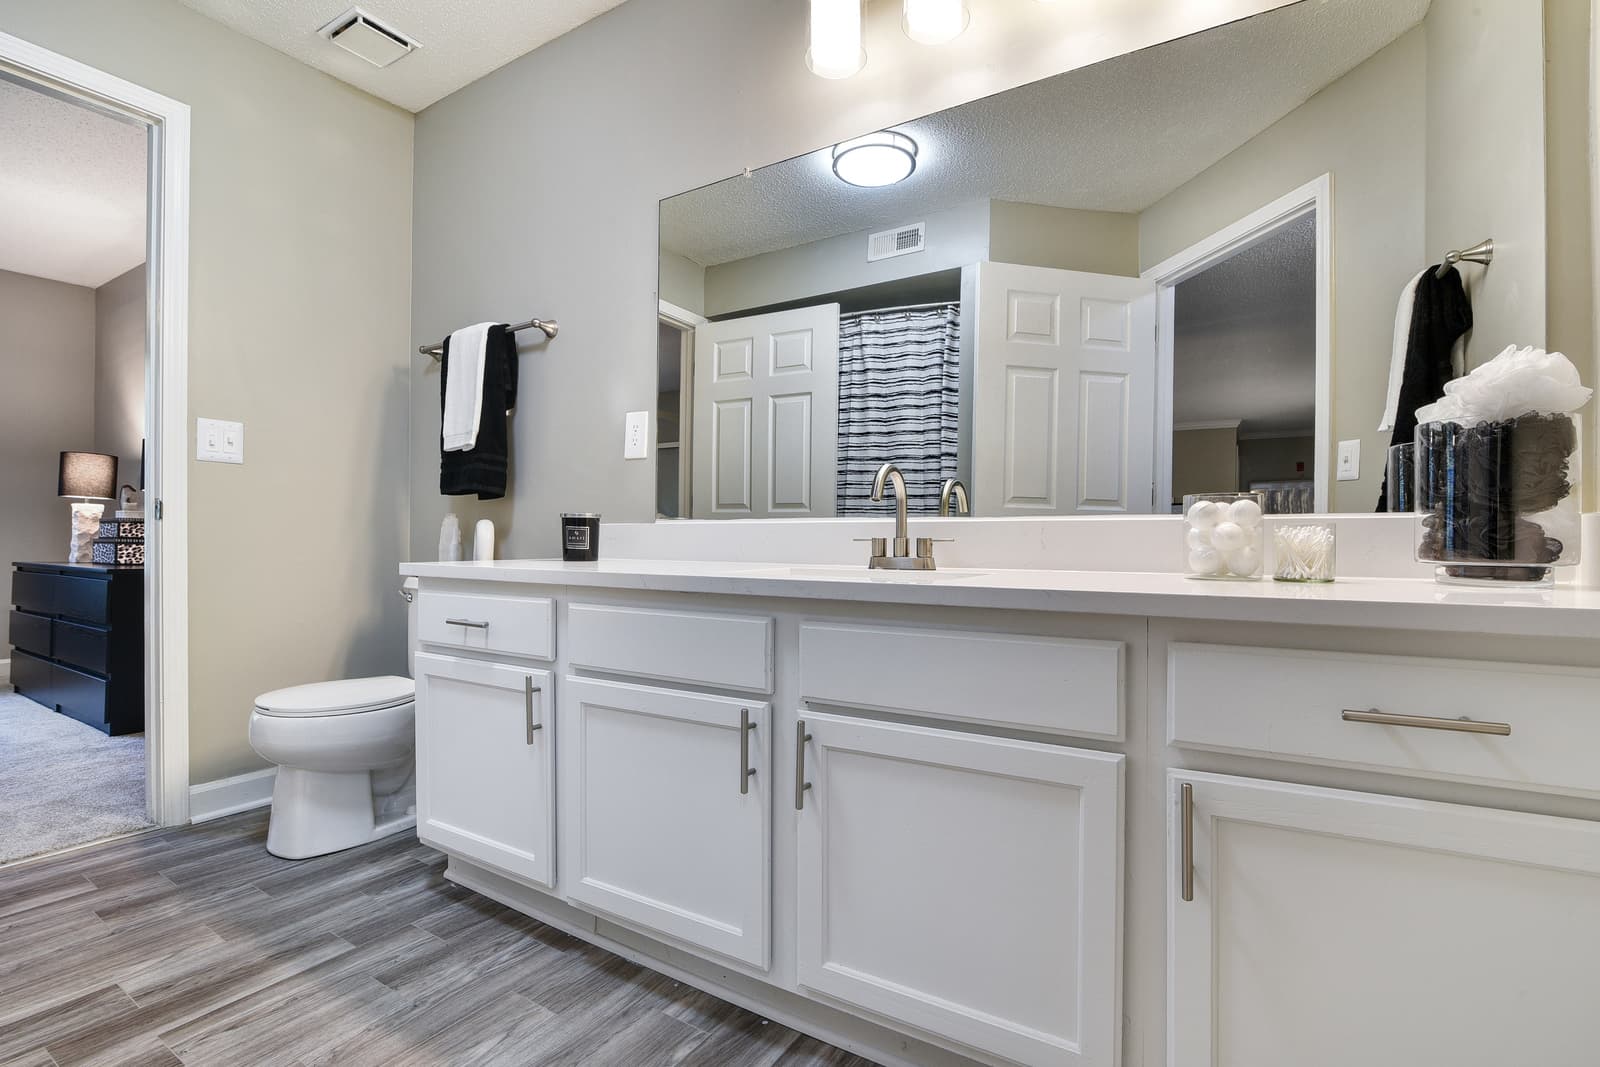 white shaker cabinets and wood-look flooring in model bathroom